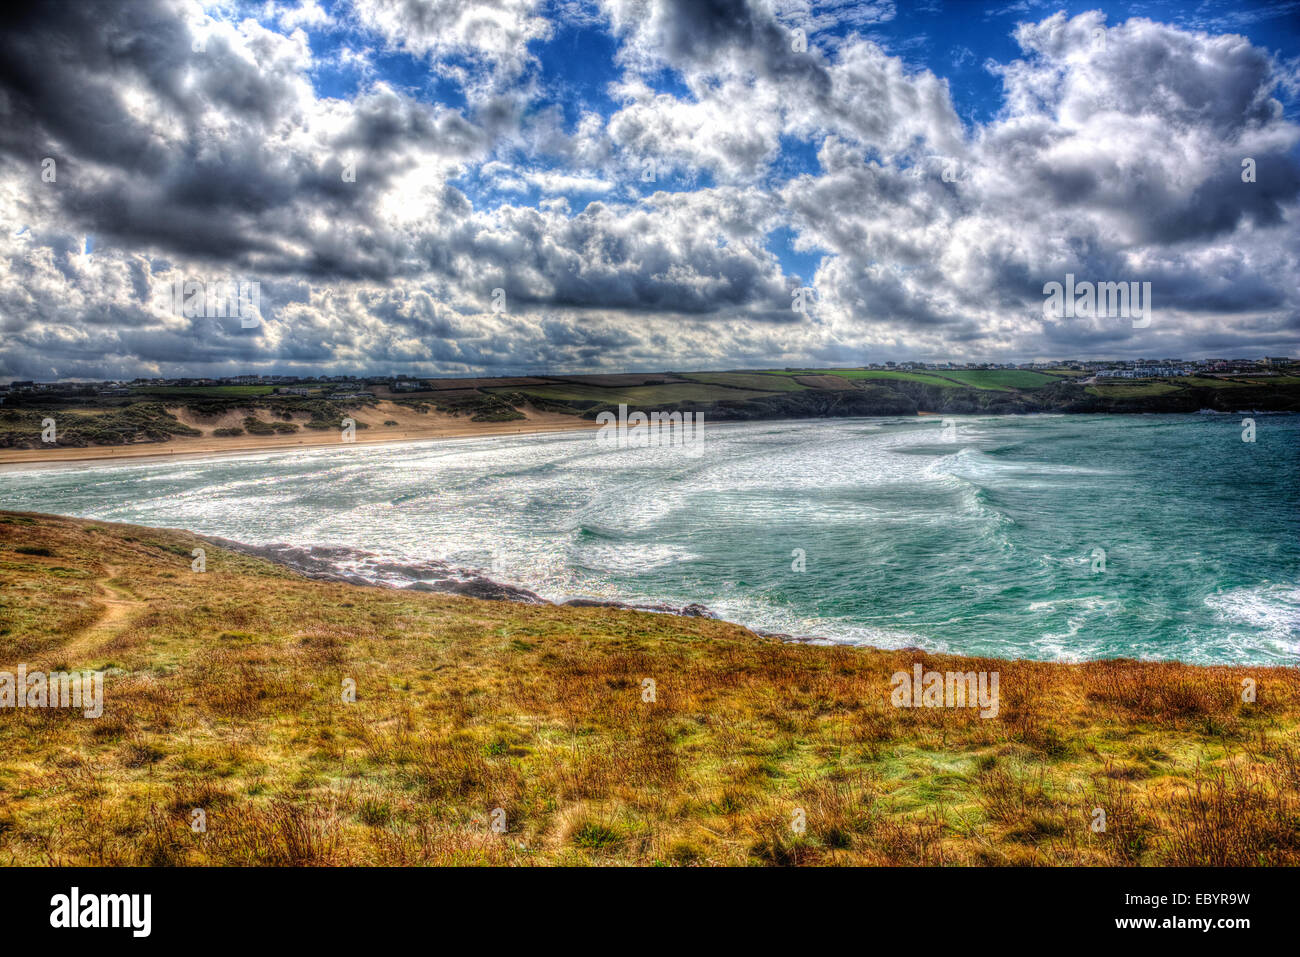 Crantock Bay Newquay coast Cornwall England UK like painting in HDR with cloudscape Stock Photo